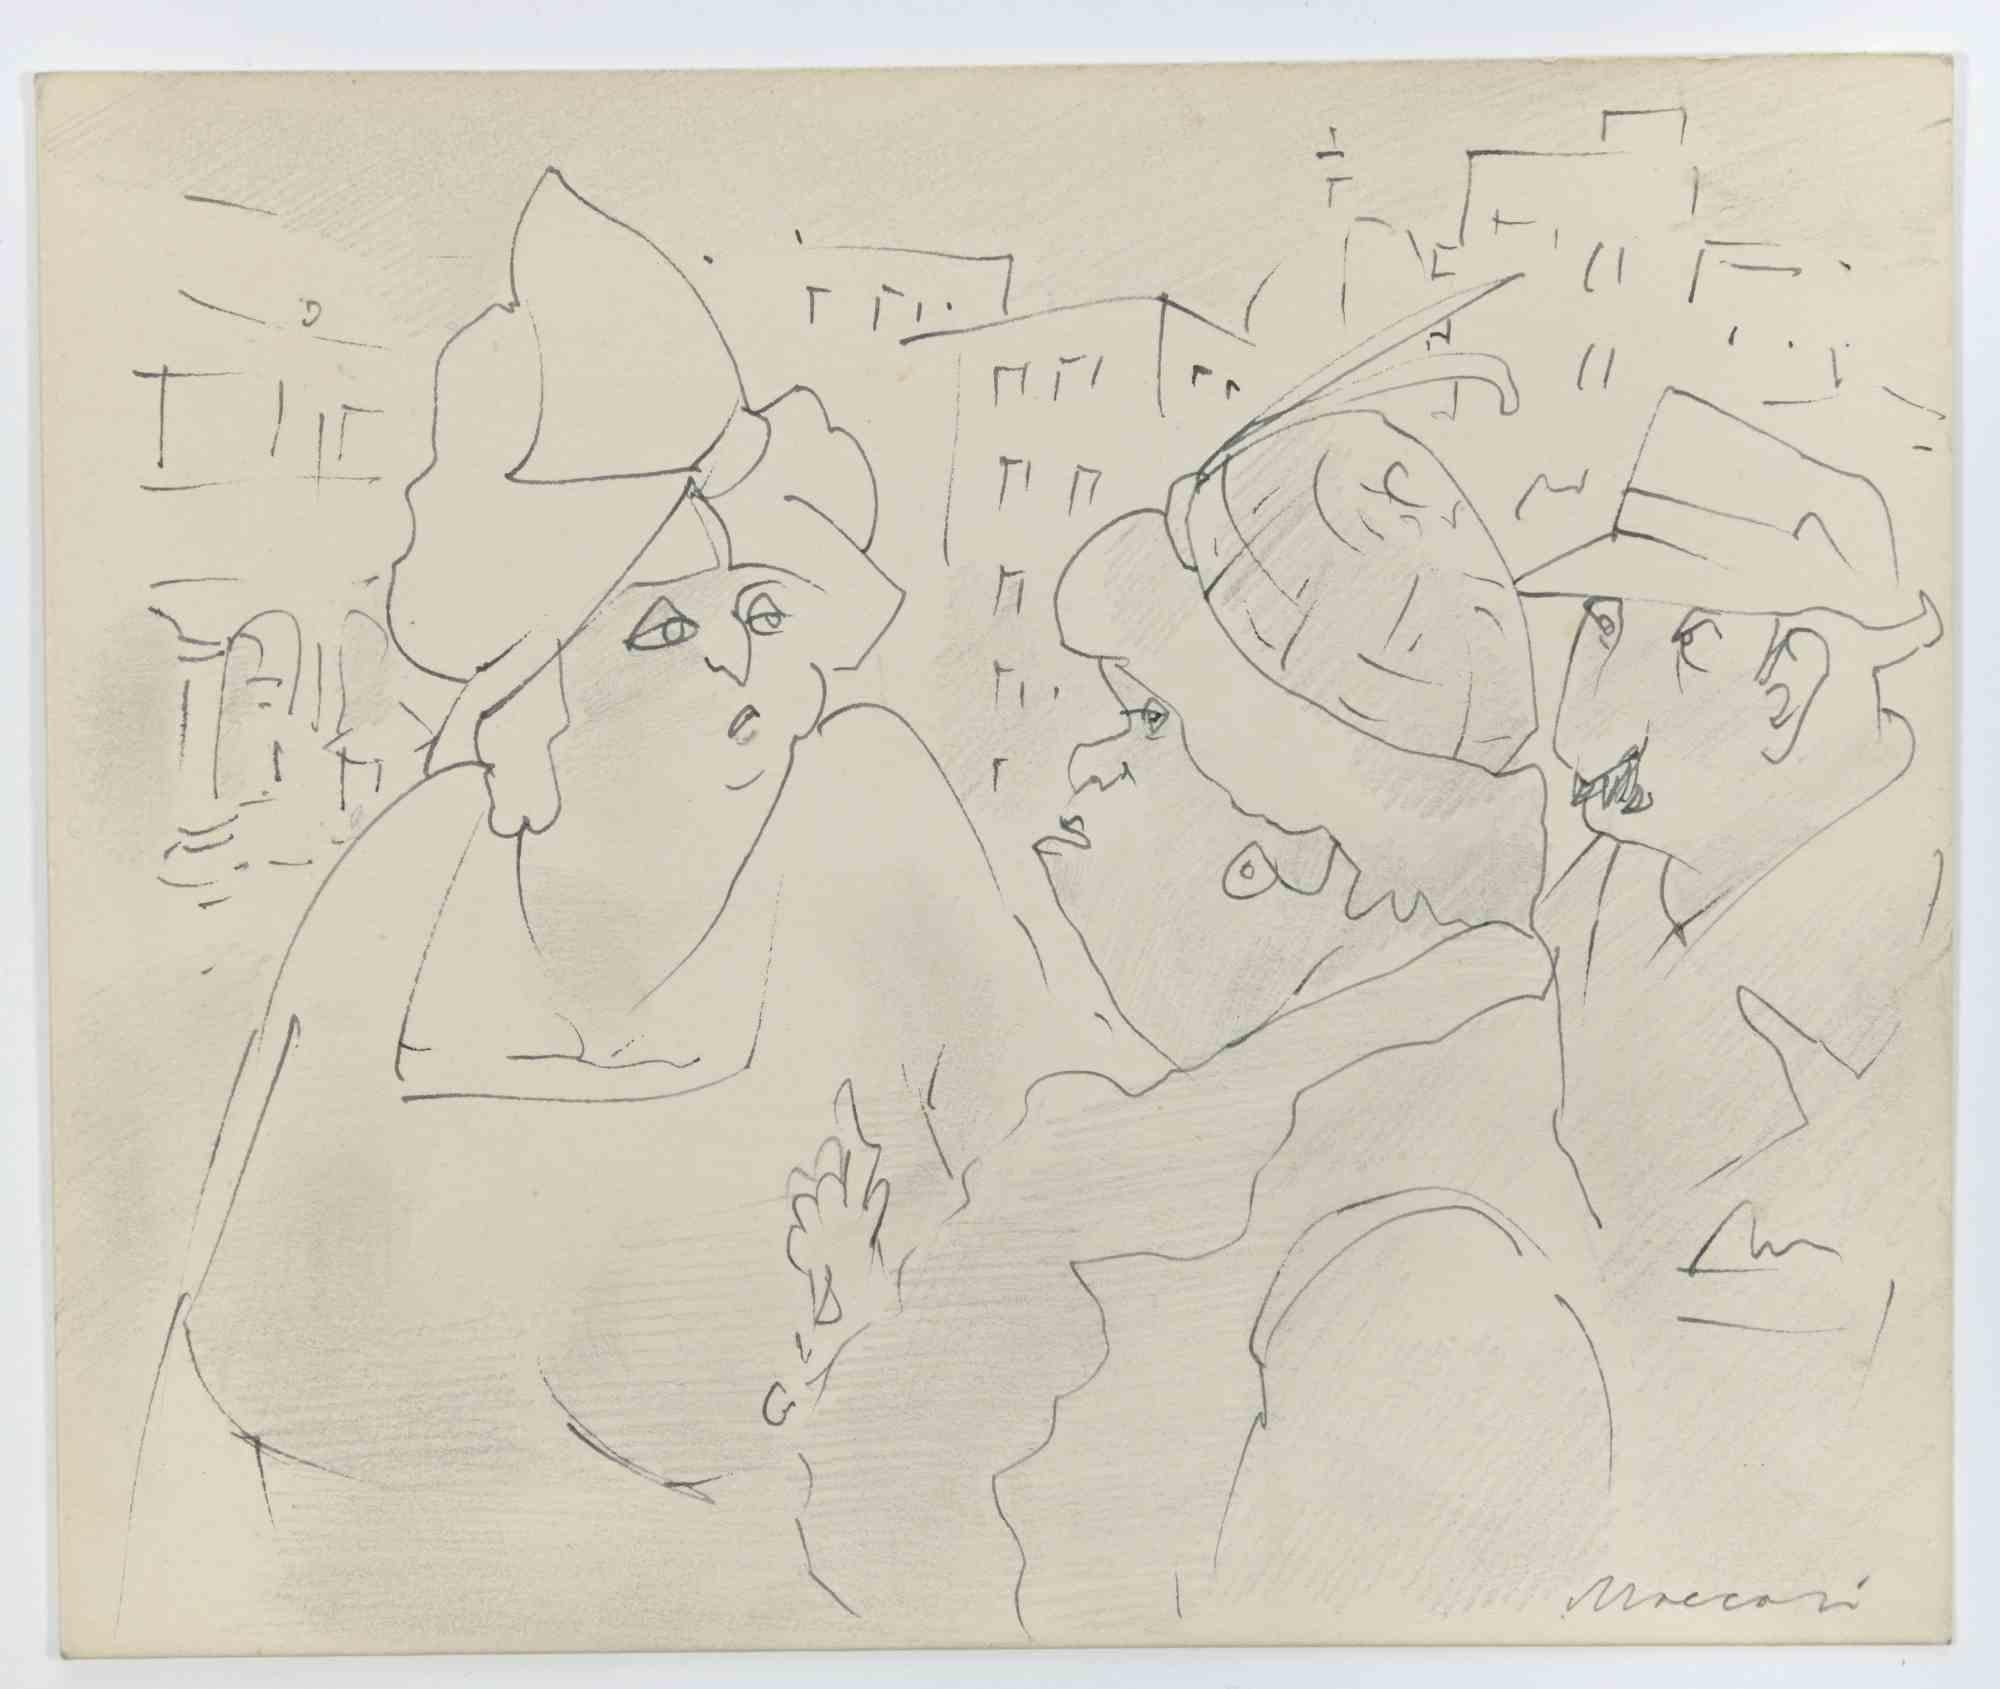 Snobby is a Pen Drawing realized by Mino Maccari  (1924-1989) in the 1960s.

Hand-signed on the lower margin.

Good condition.

Mino Maccari (Siena, 1924-Rome, June 16, 1989) was an Italian writer, painter, engraver and journalist, winner of the